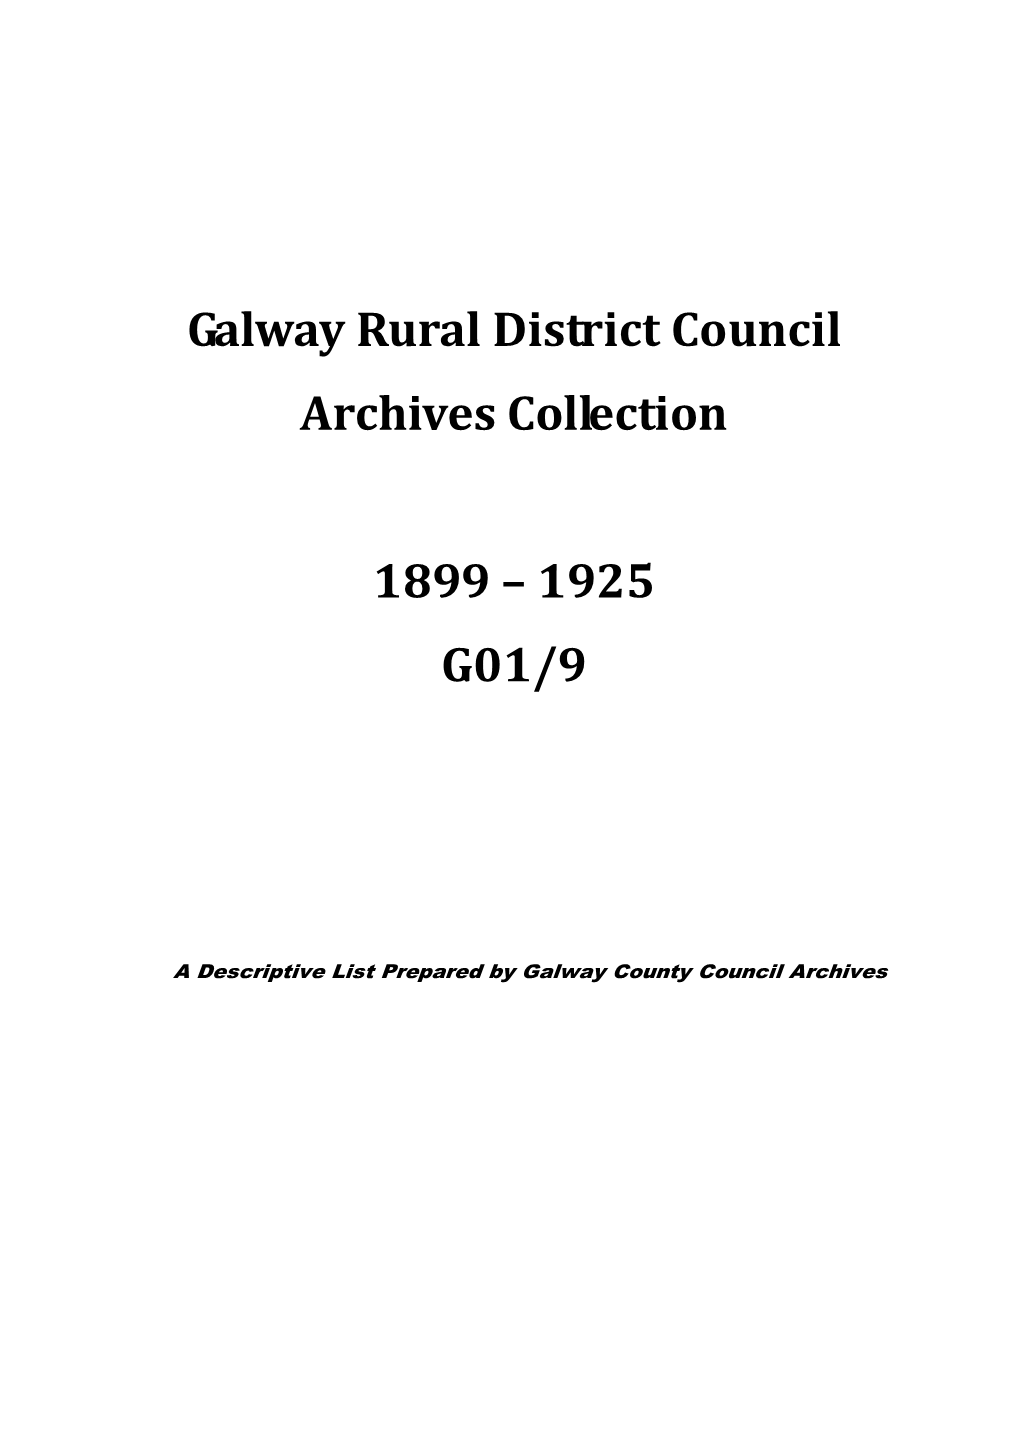 G01-9 Galway Rural District Council 1899-1925